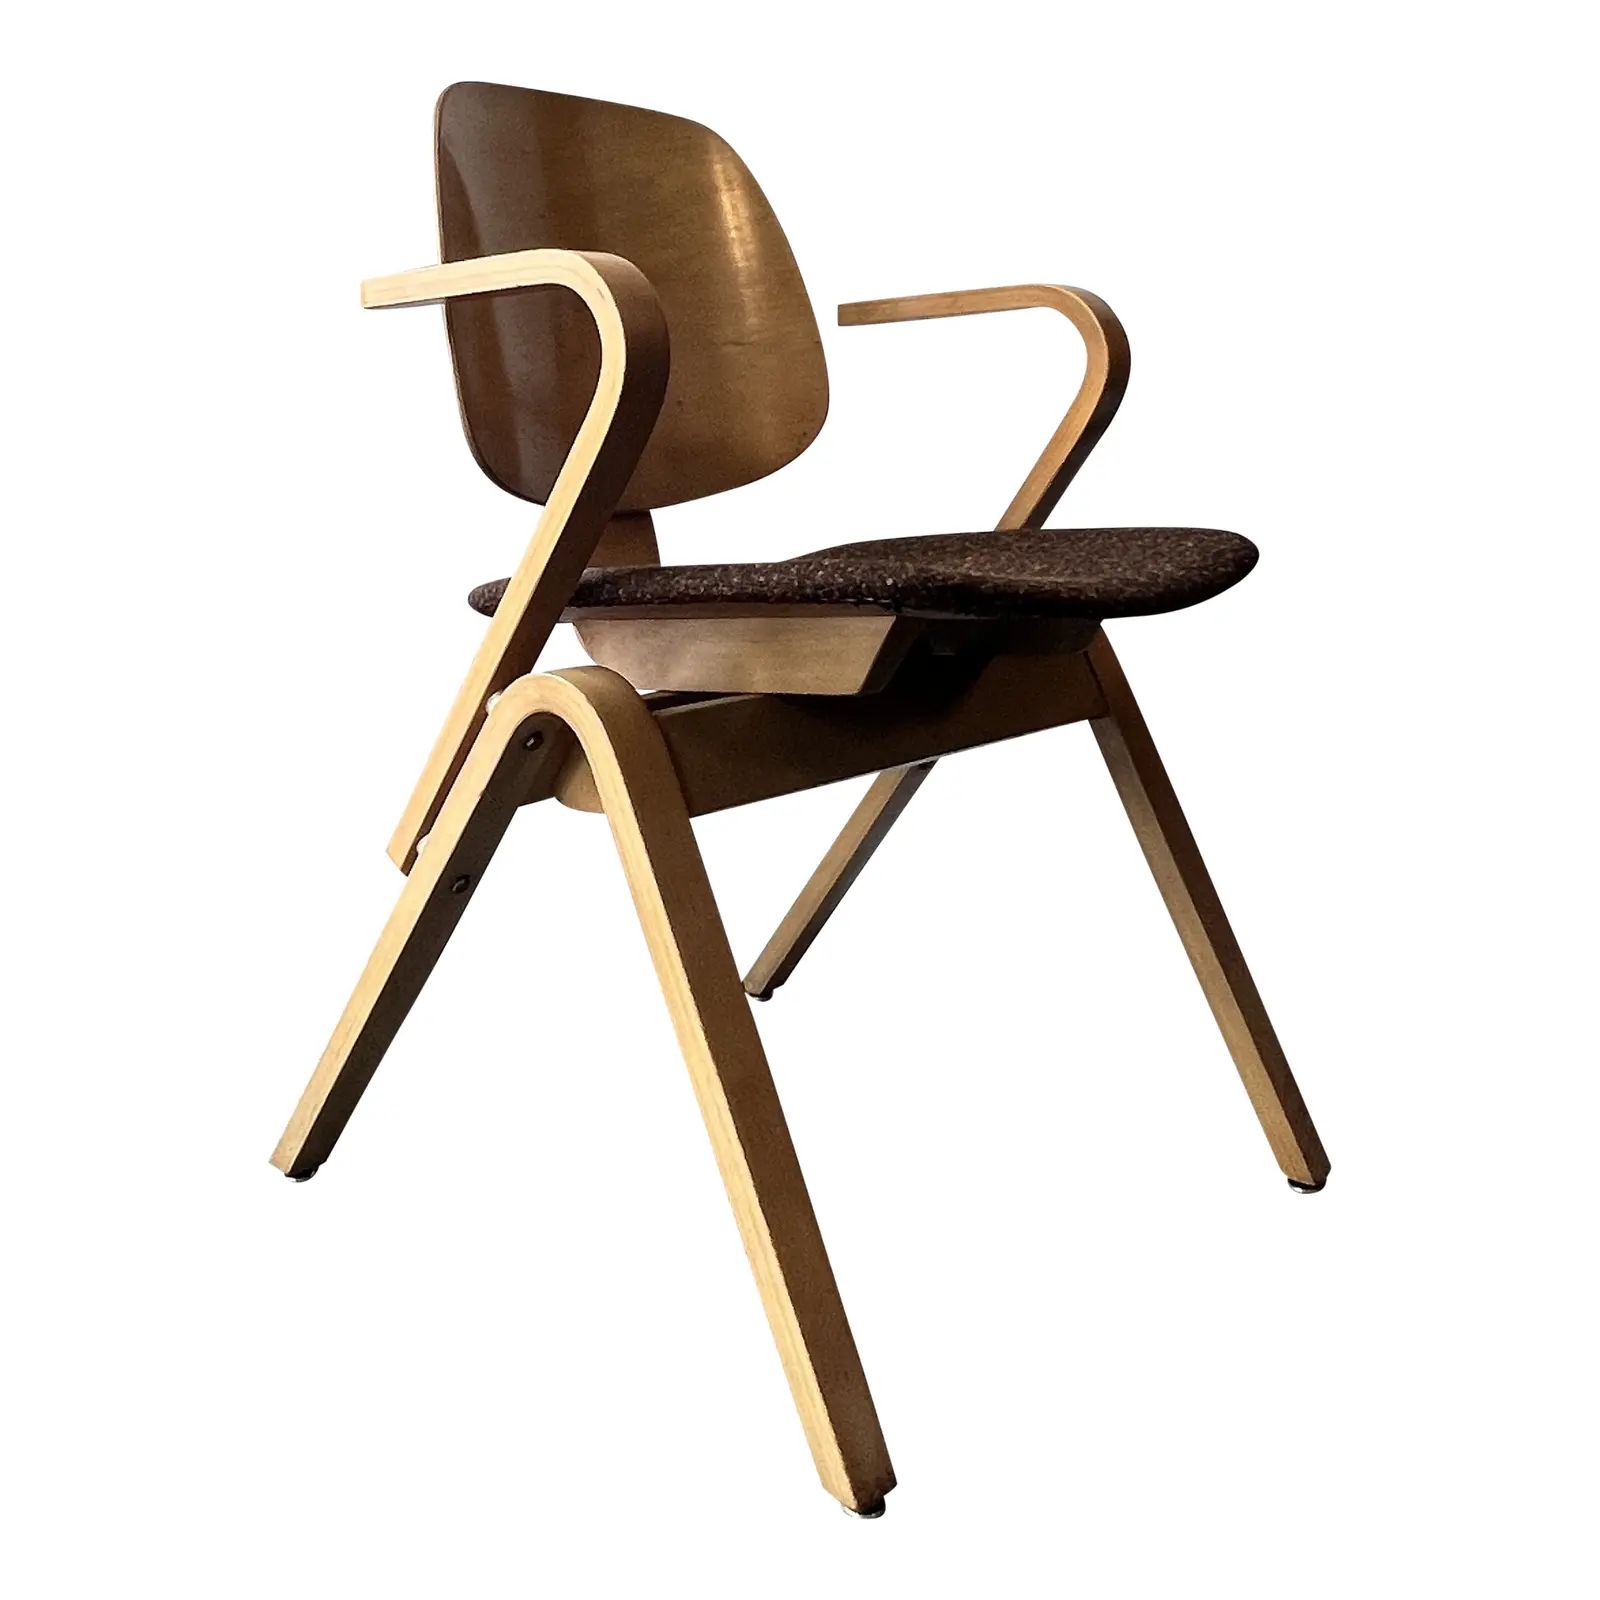 1950s Bent Plywood Chair by Joe Atkinson for Thonet | Chairish